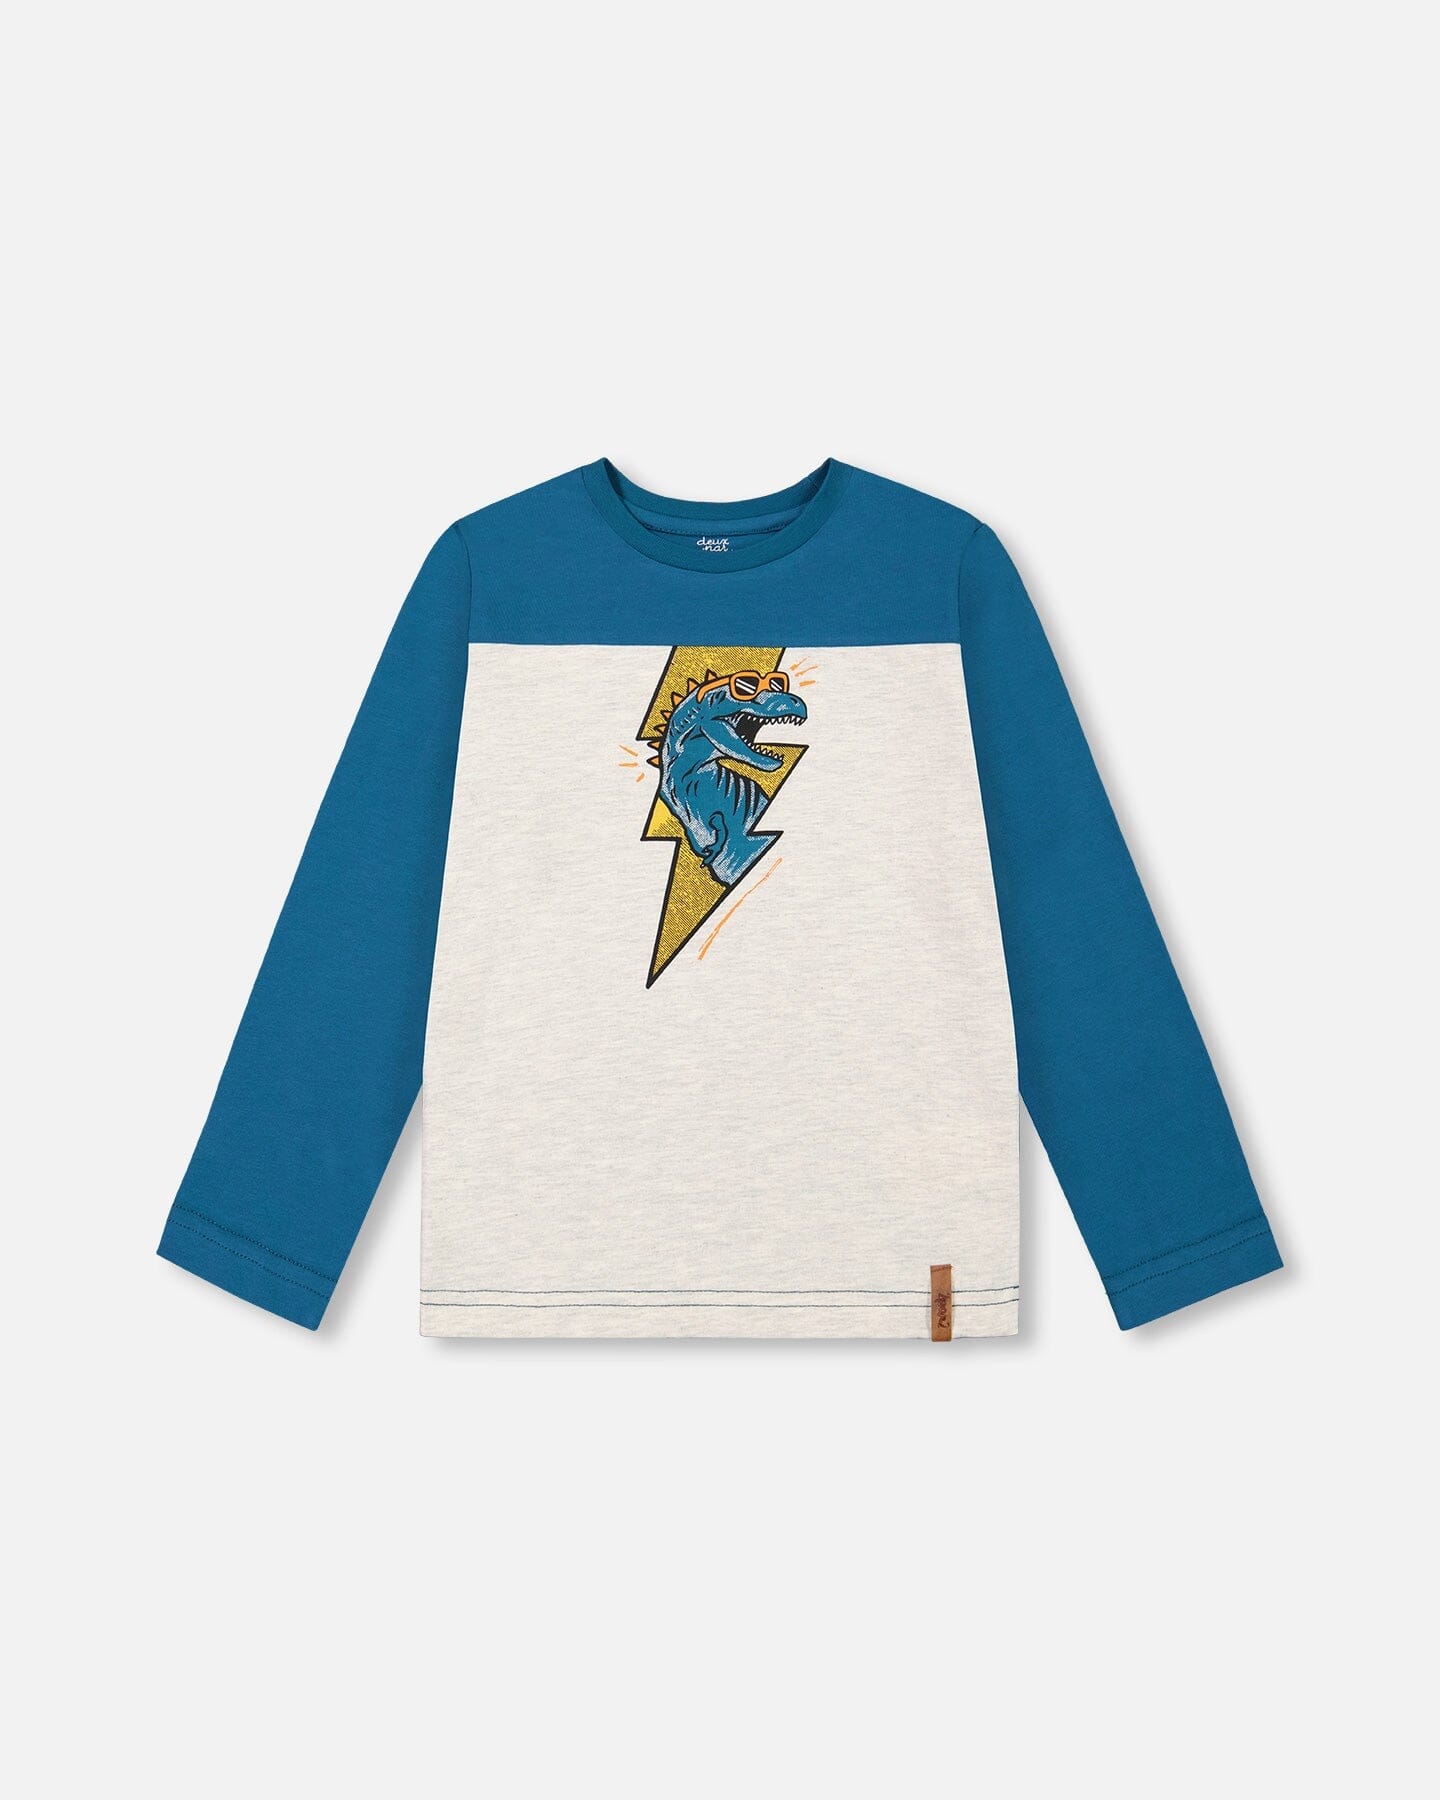 Jersey T-Shirt With Print Oatmeal Mix And Teal Blue - F20U76_759